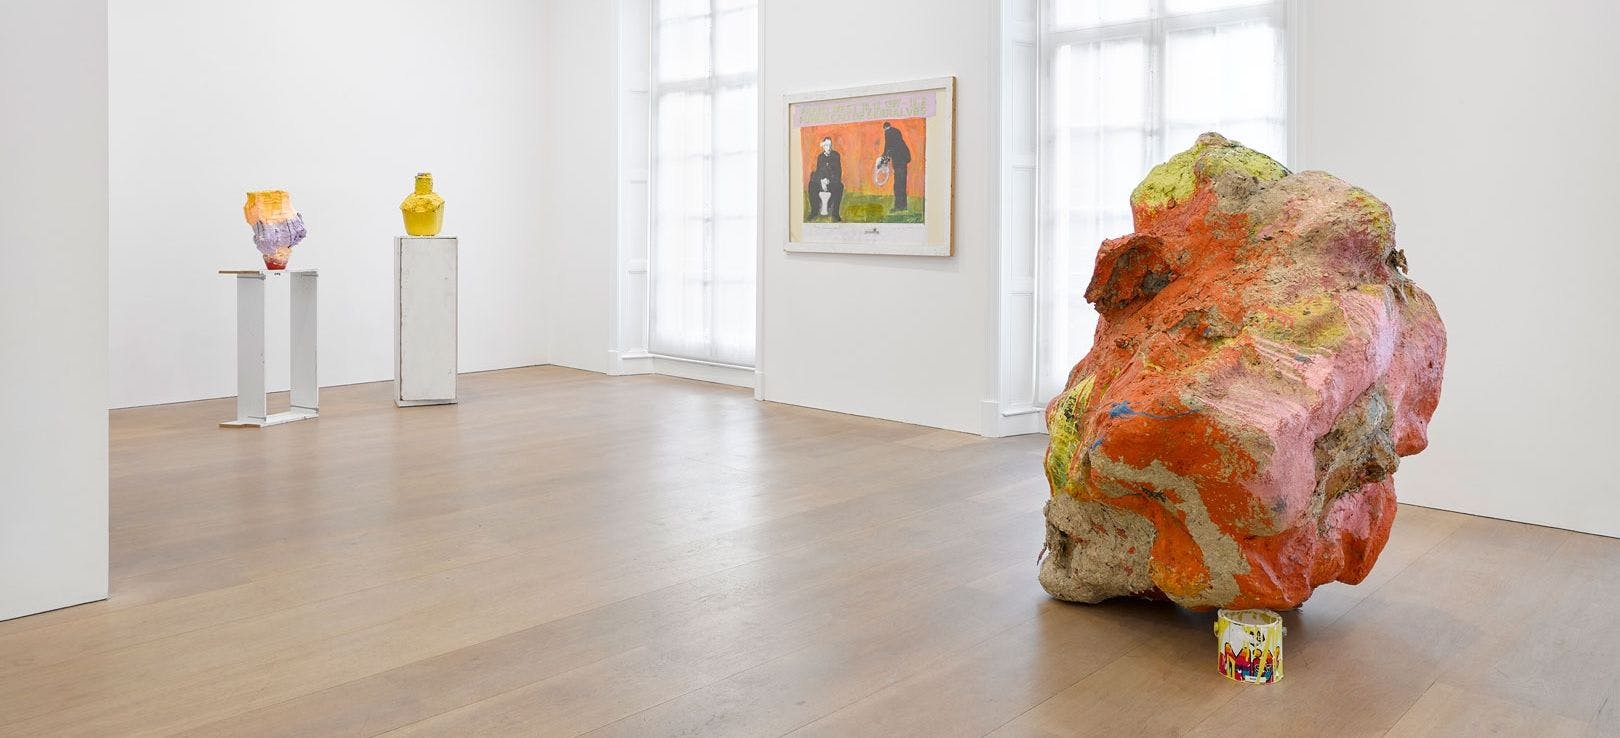 Installation view of the exhibition Franz West, at David Zwirner London, dated February 21 through April 5, 2019.